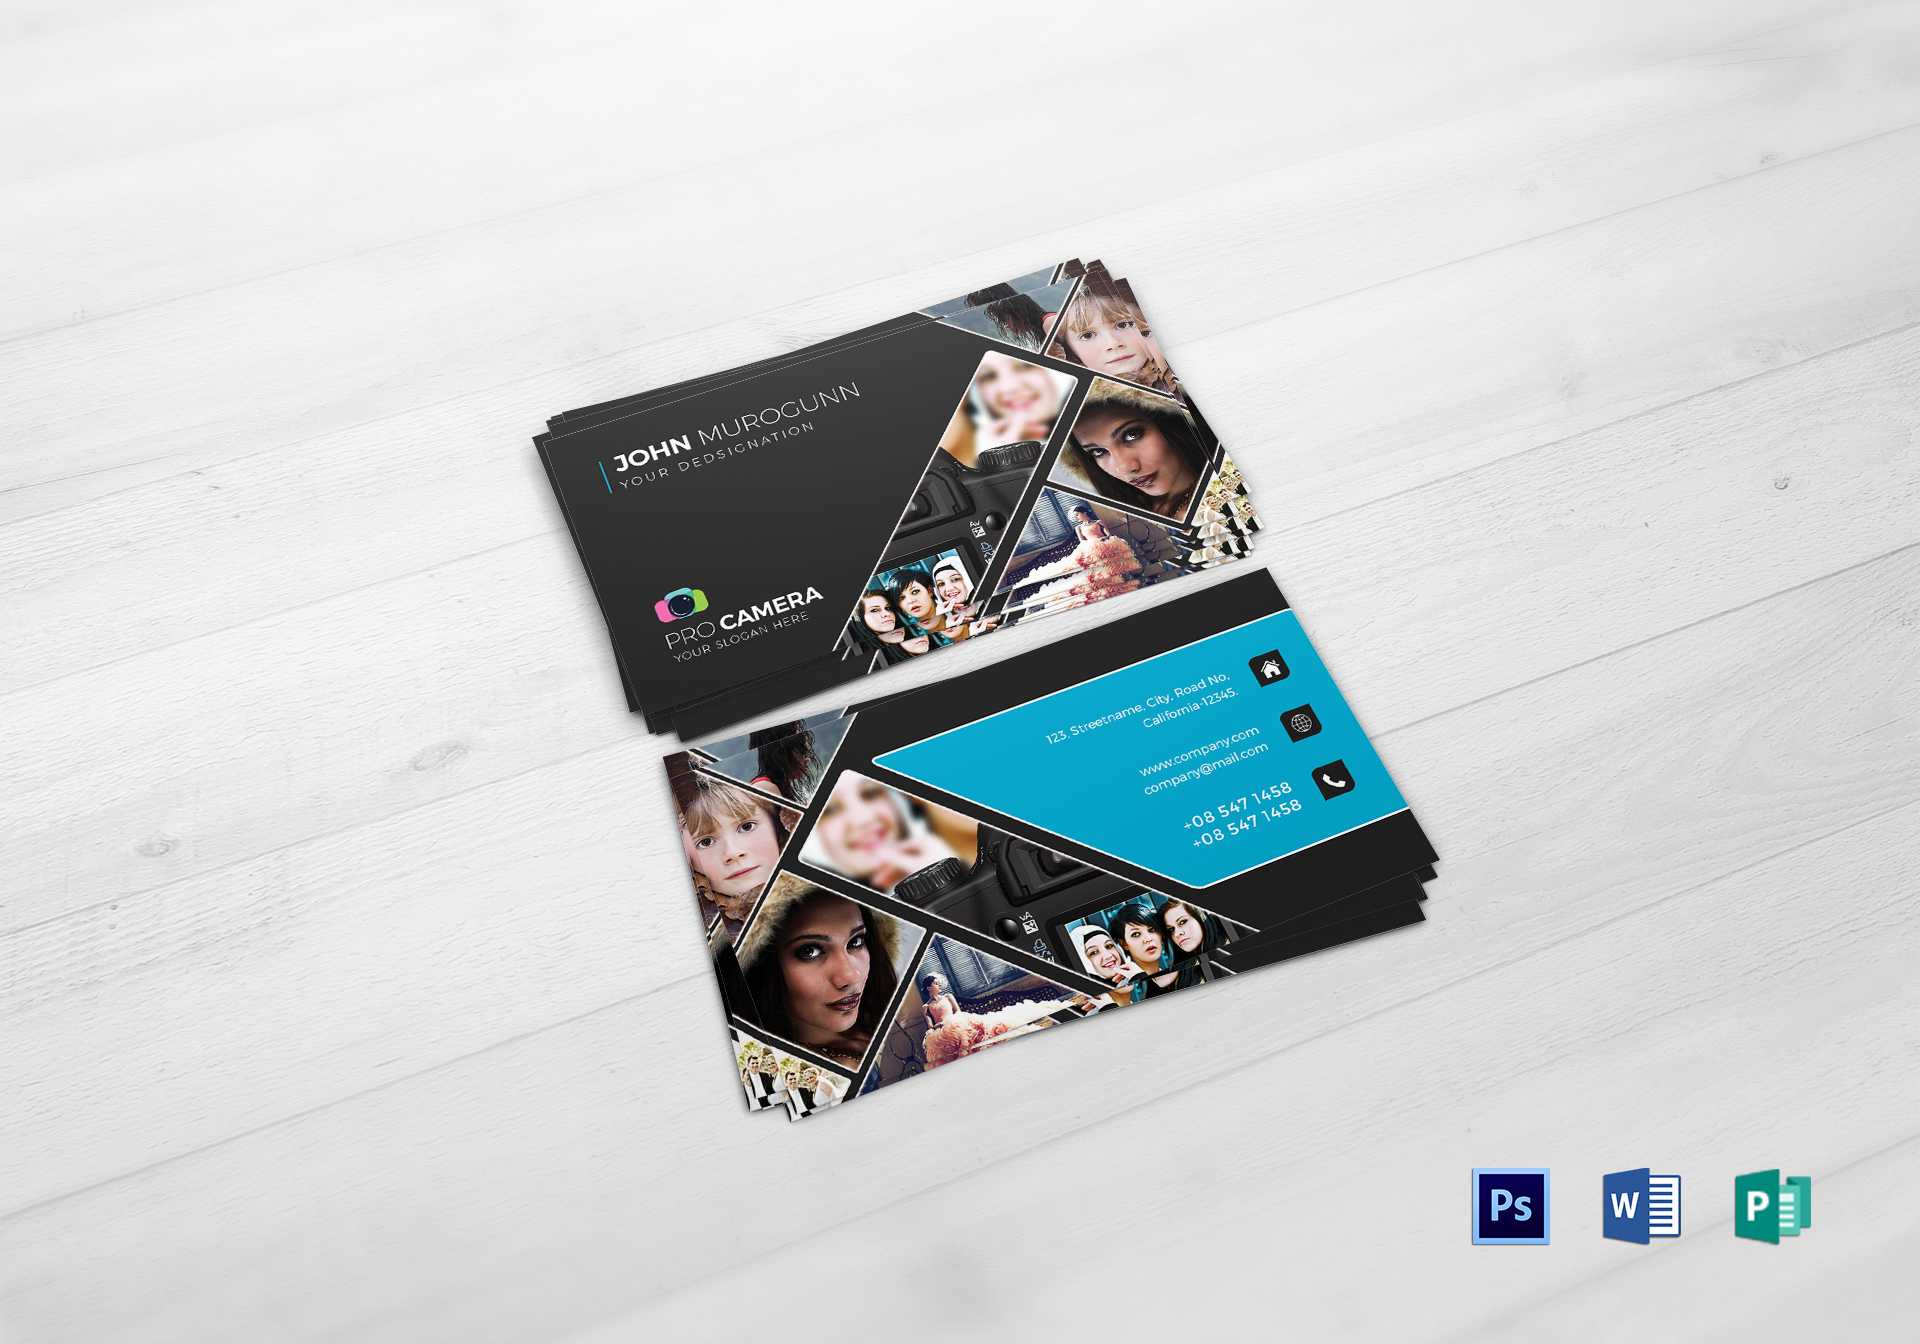 003 Photography Business Card Template Ideas Photographer Pertaining To Photography Business Card Template Photoshop